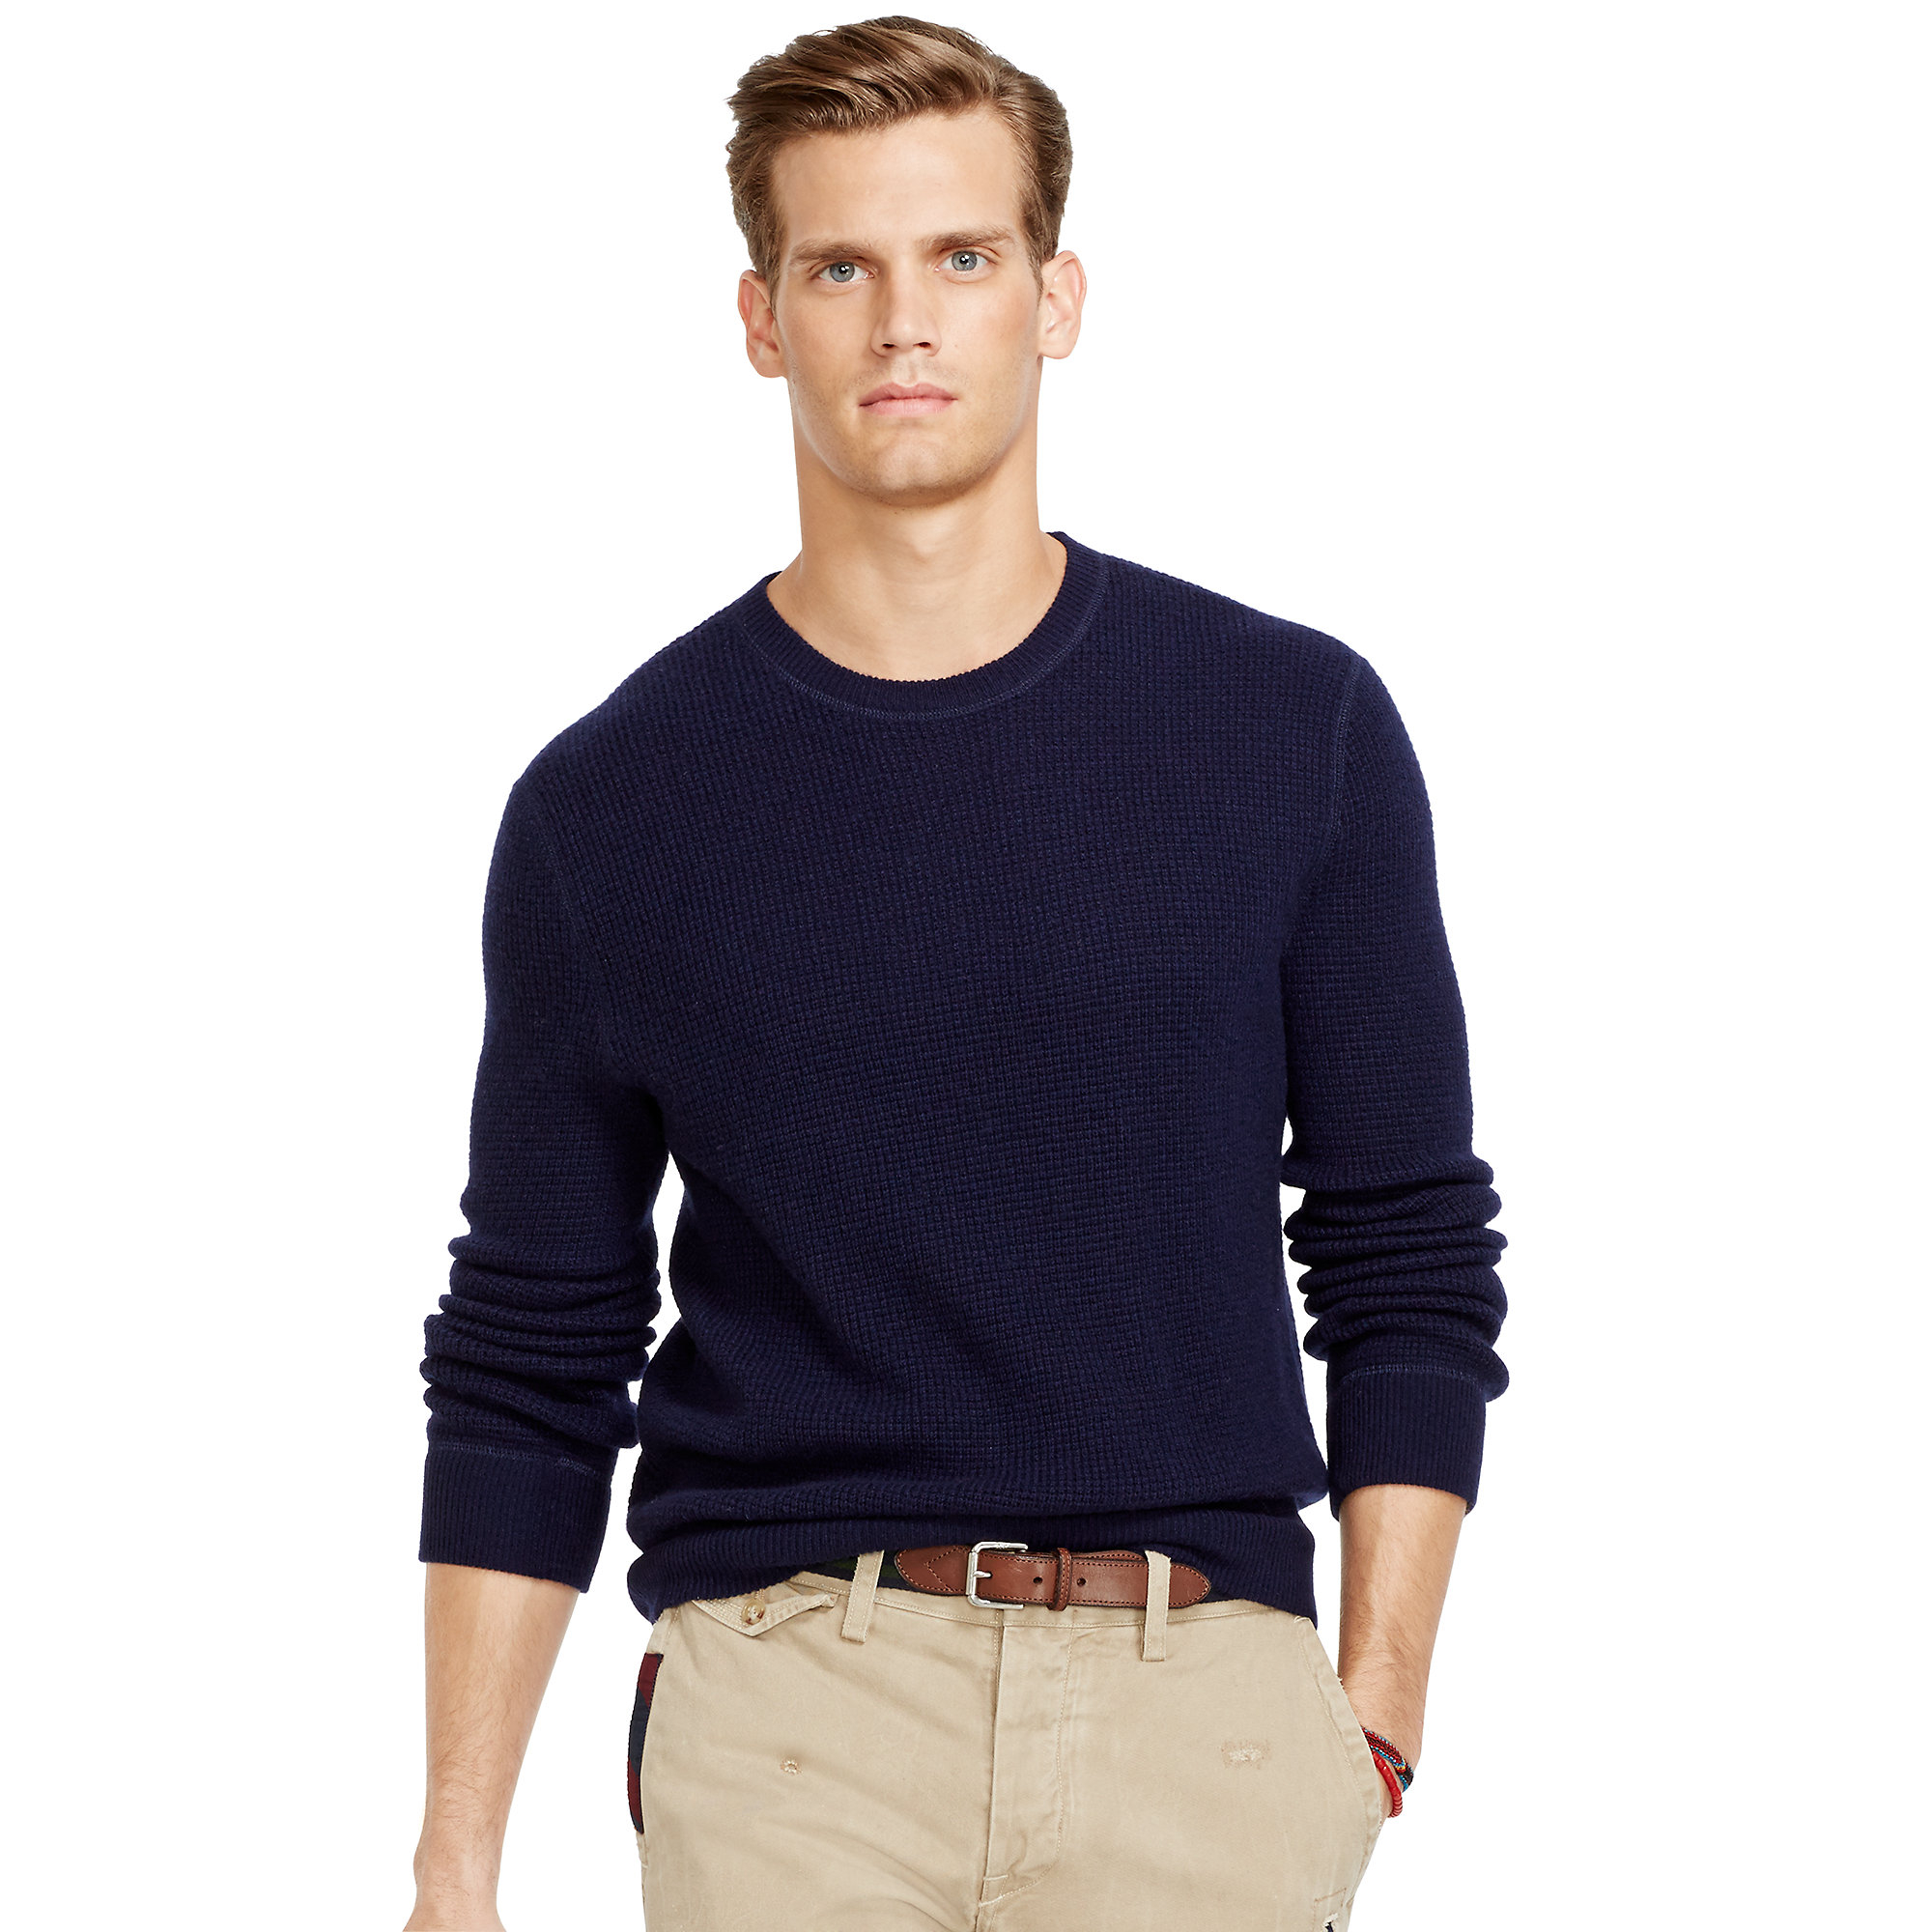 Ralph Lauren Waffle-Knit Cashmere Sweater in Navy (Blue) for Men - Lyst